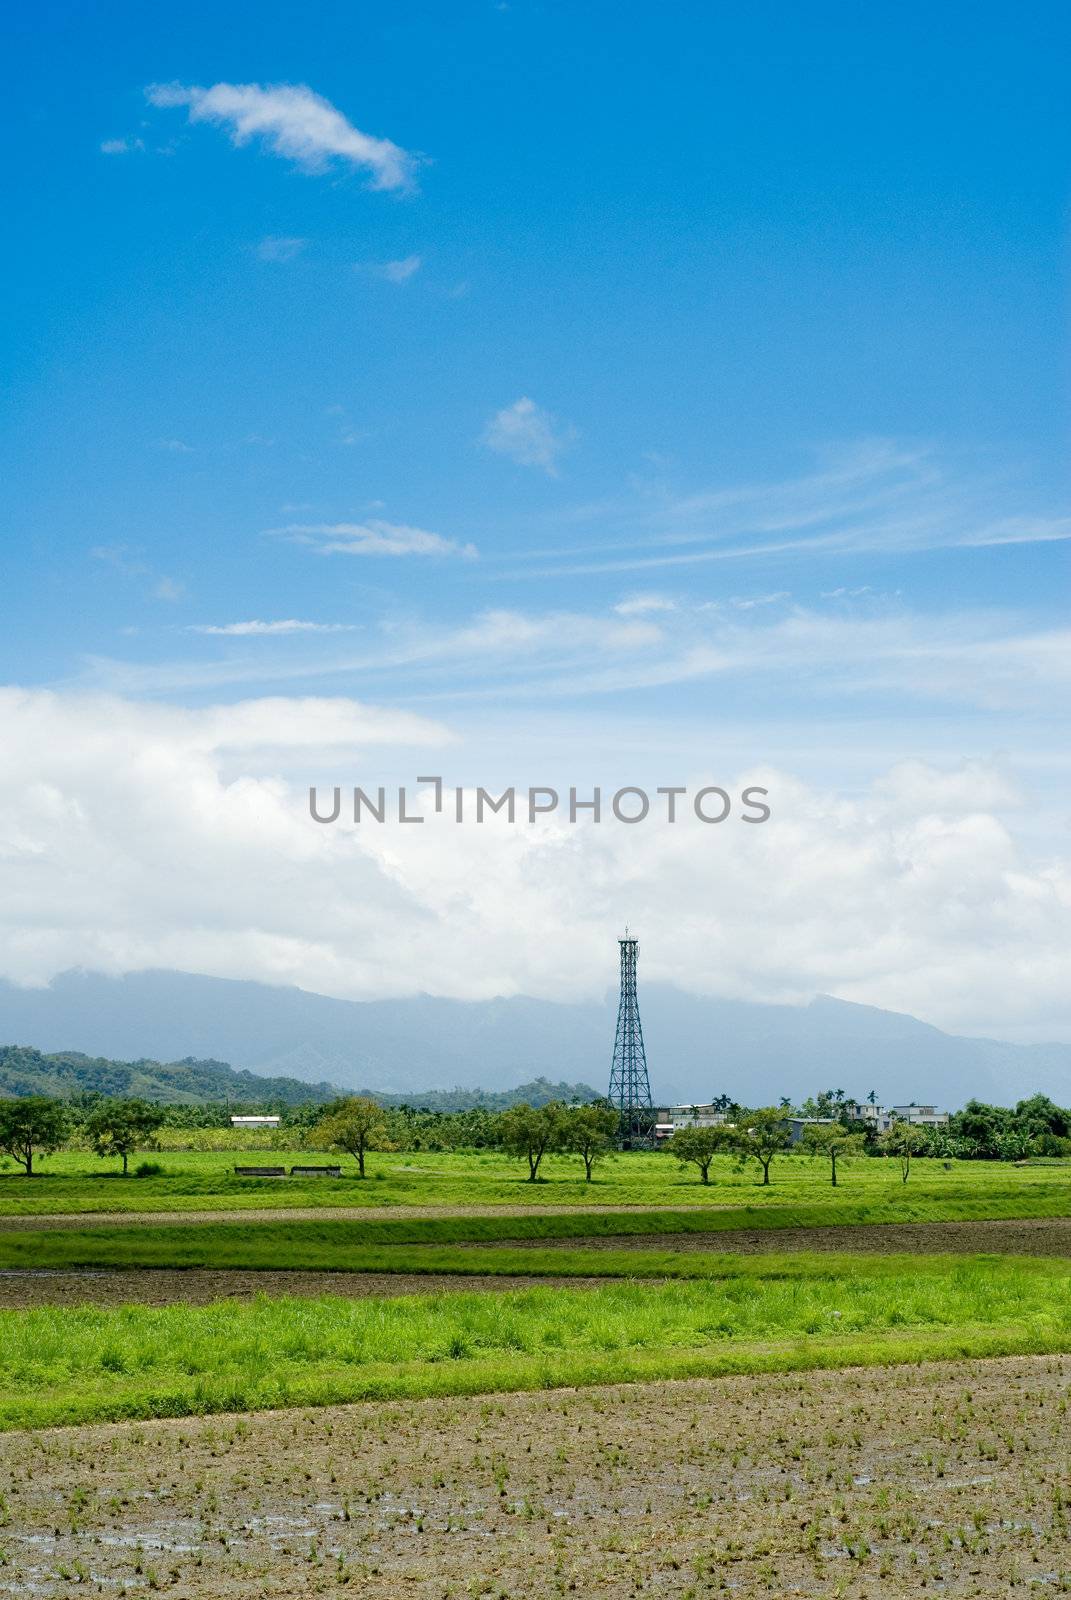 It is a tower on the green farm with blue sky.